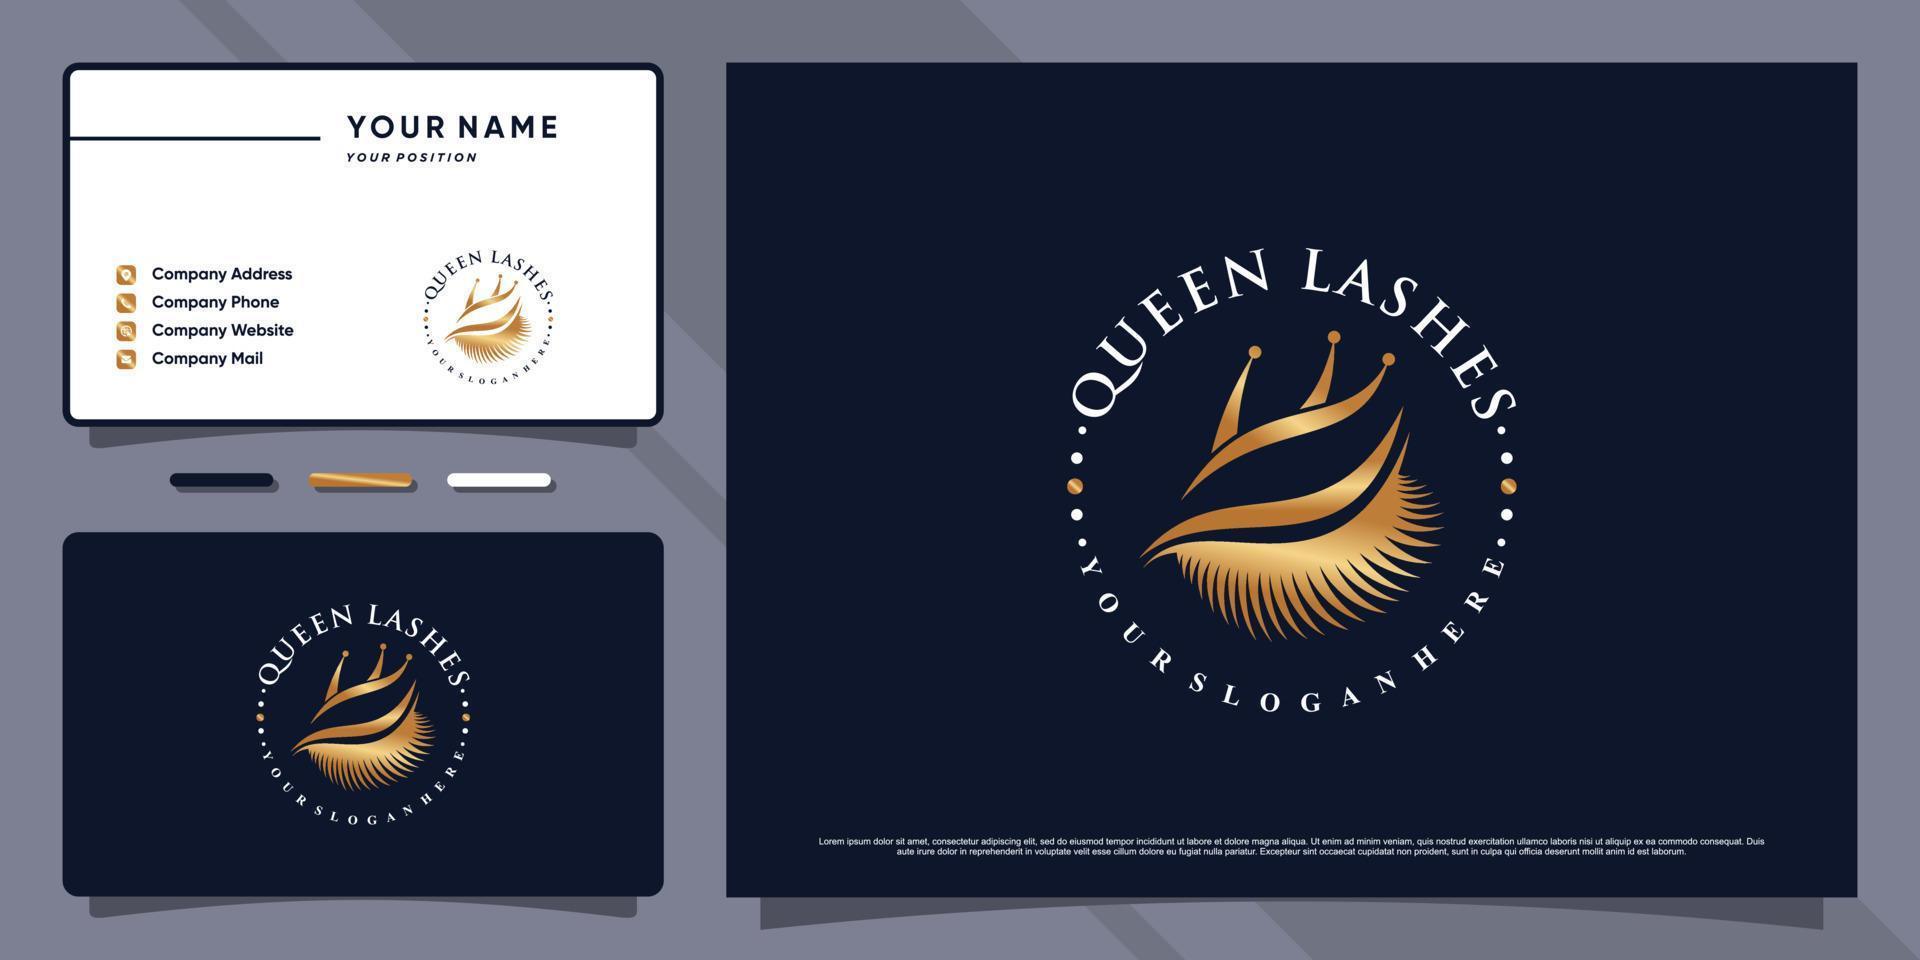 Simple and elegant queen lashes logo with modern concept and business card design Premium Vector